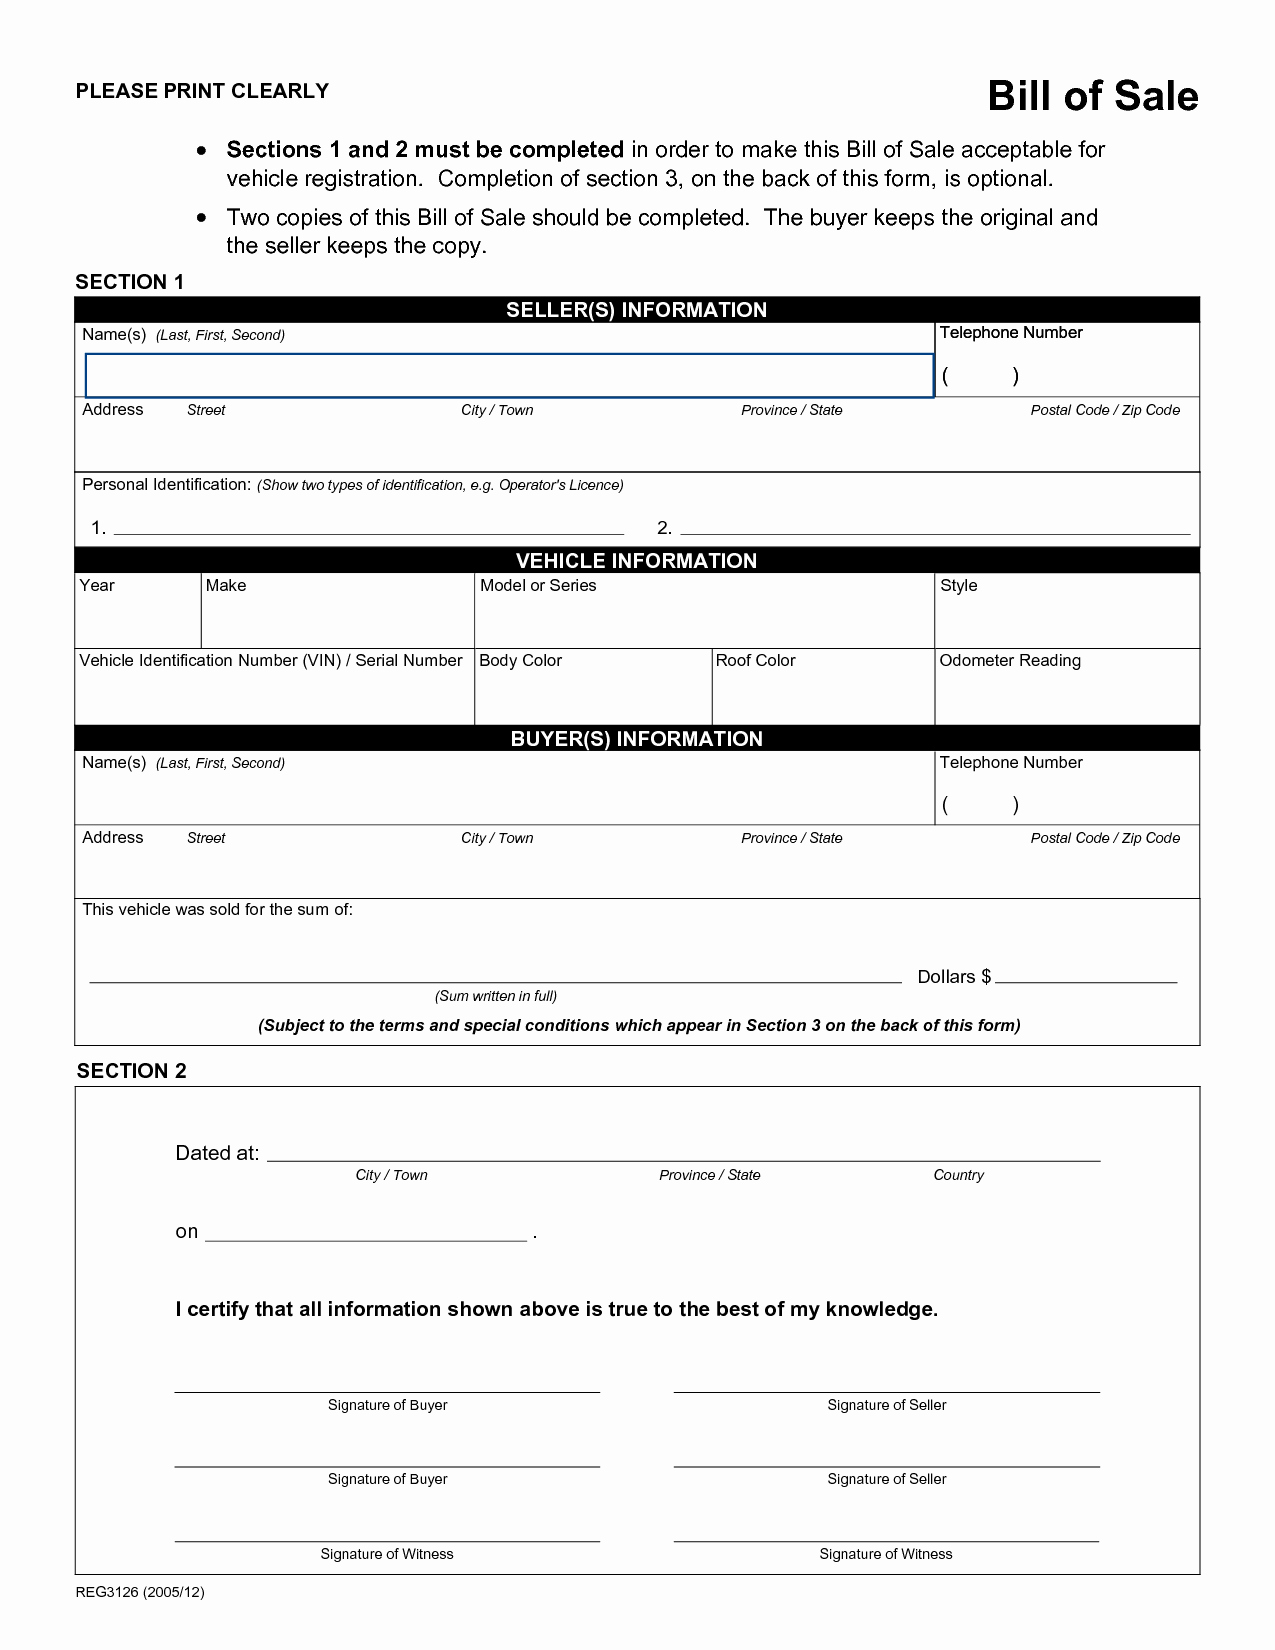 Bill Of Sale Free Lovely Free Printable Rv Bill Of Sale form form Generic